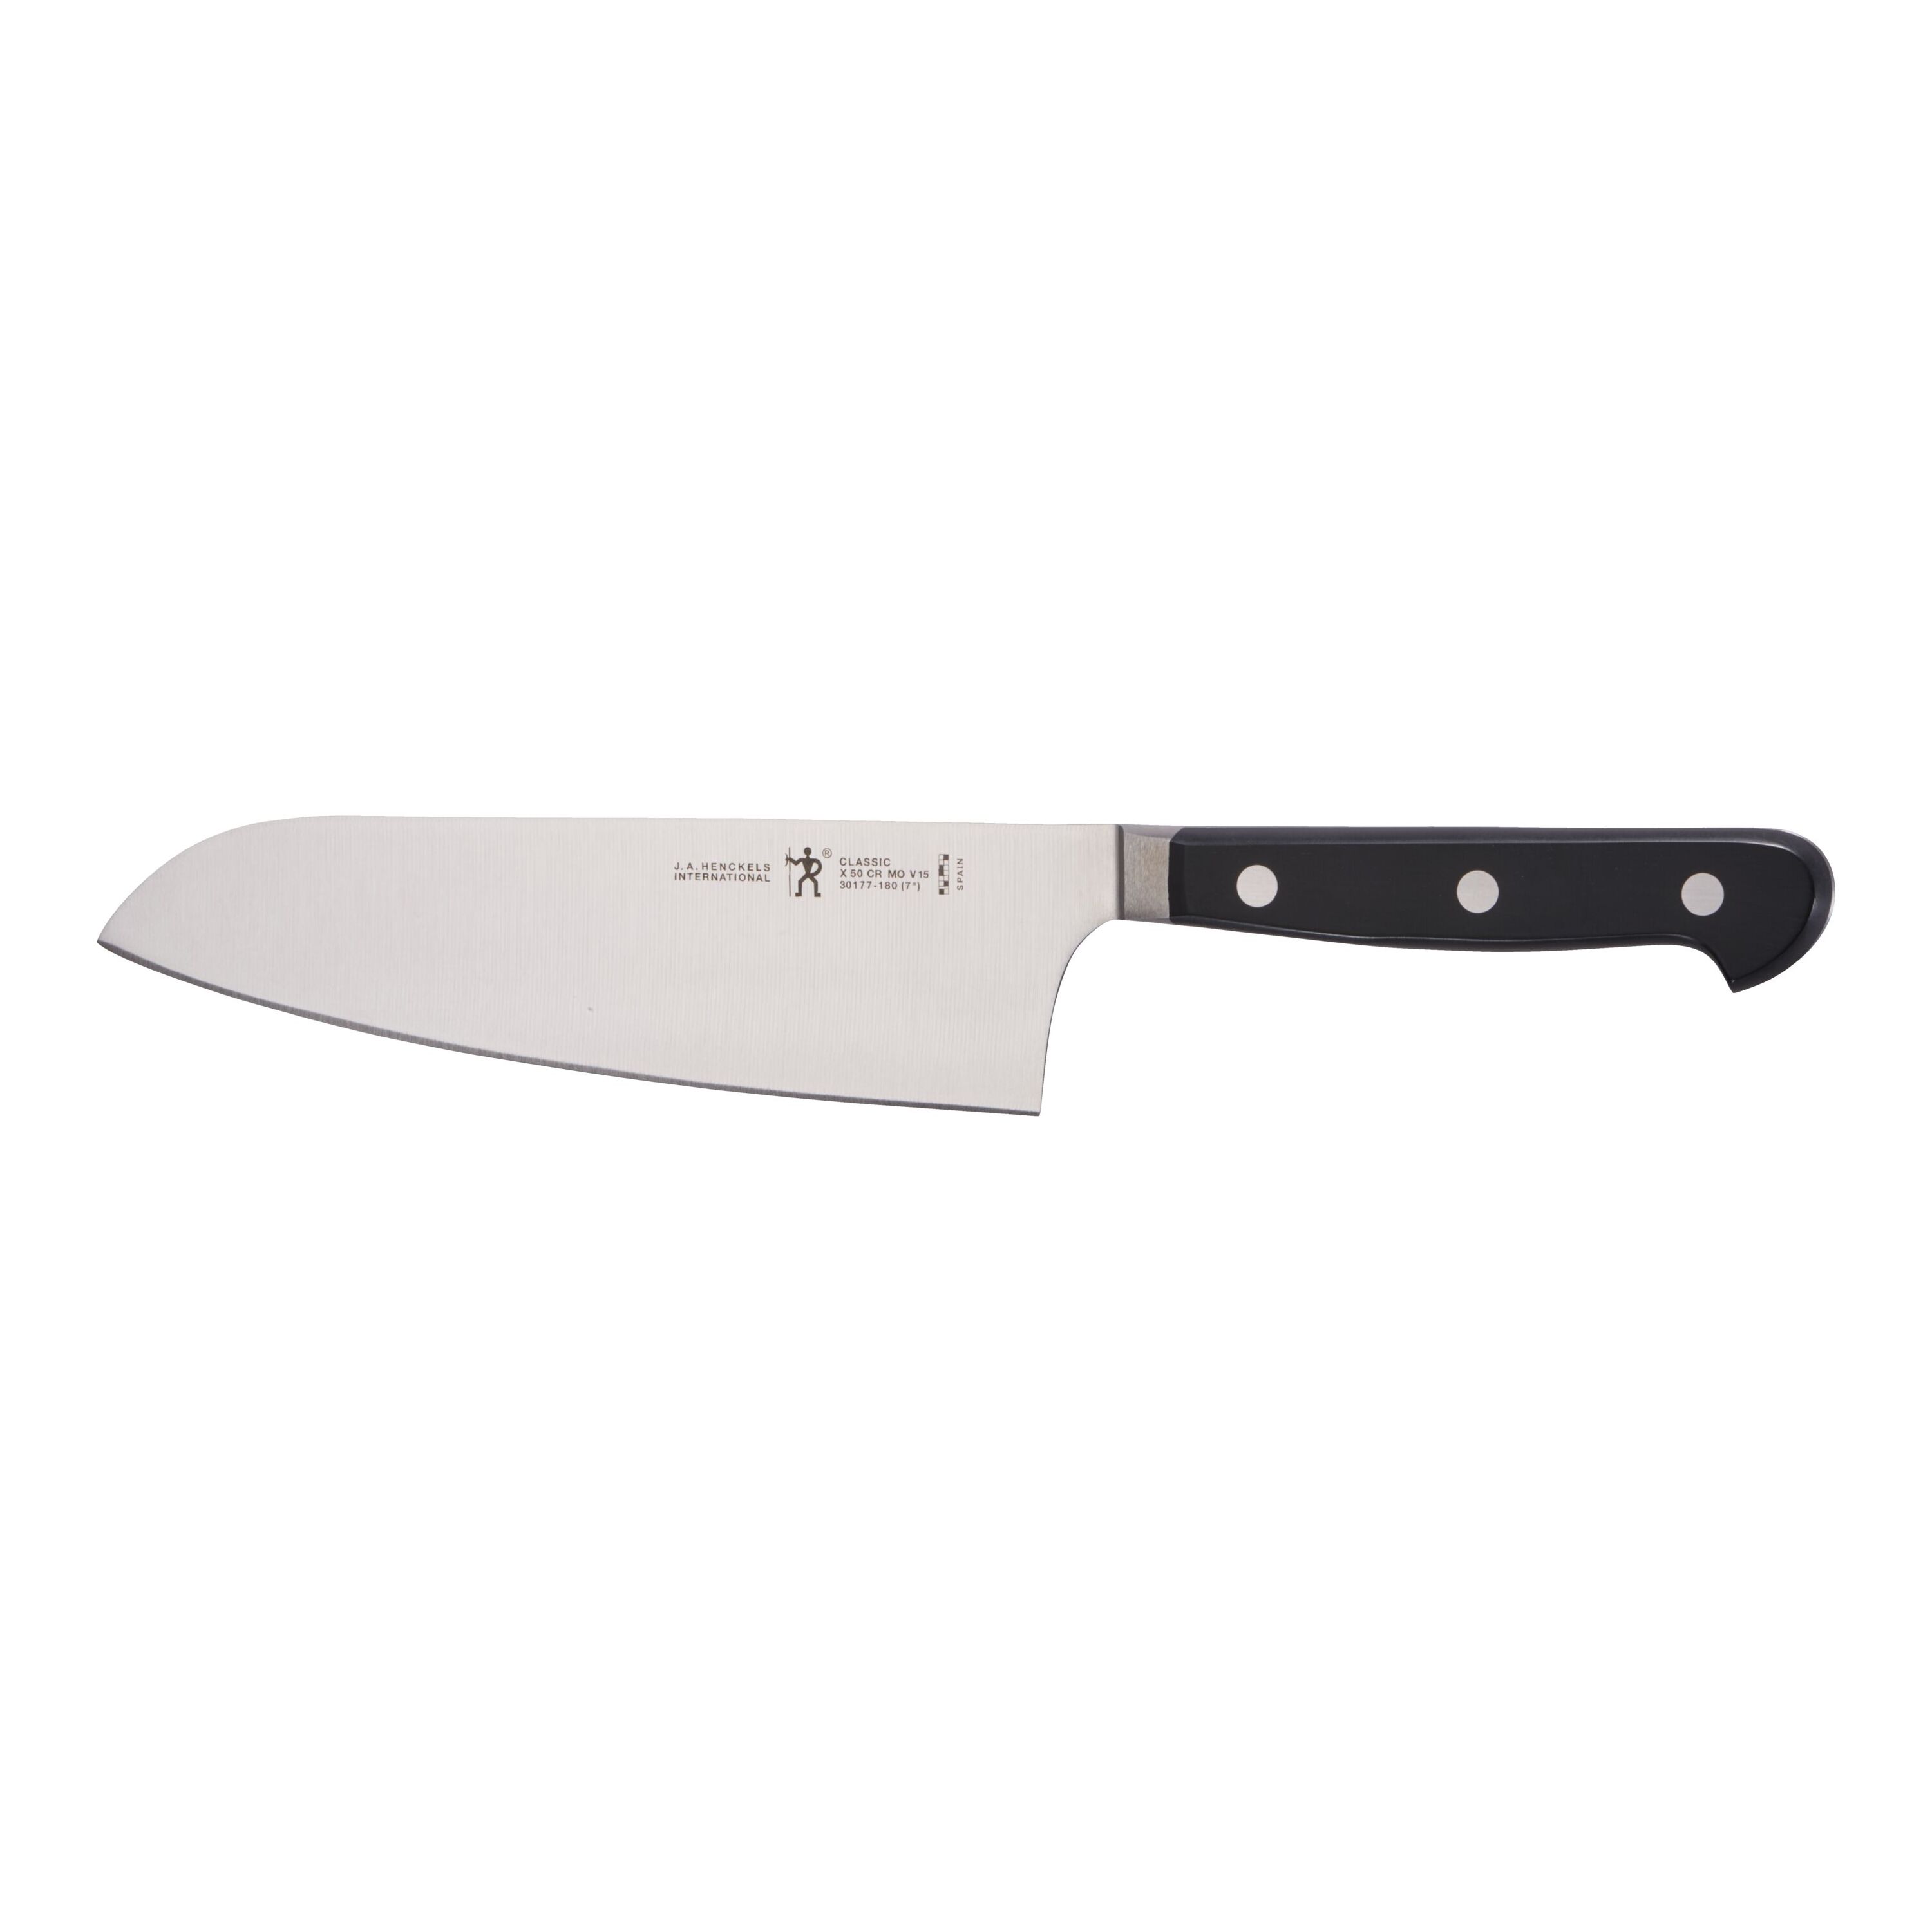 7 Tips for Shopping and Care for Knives, According to Zwilling